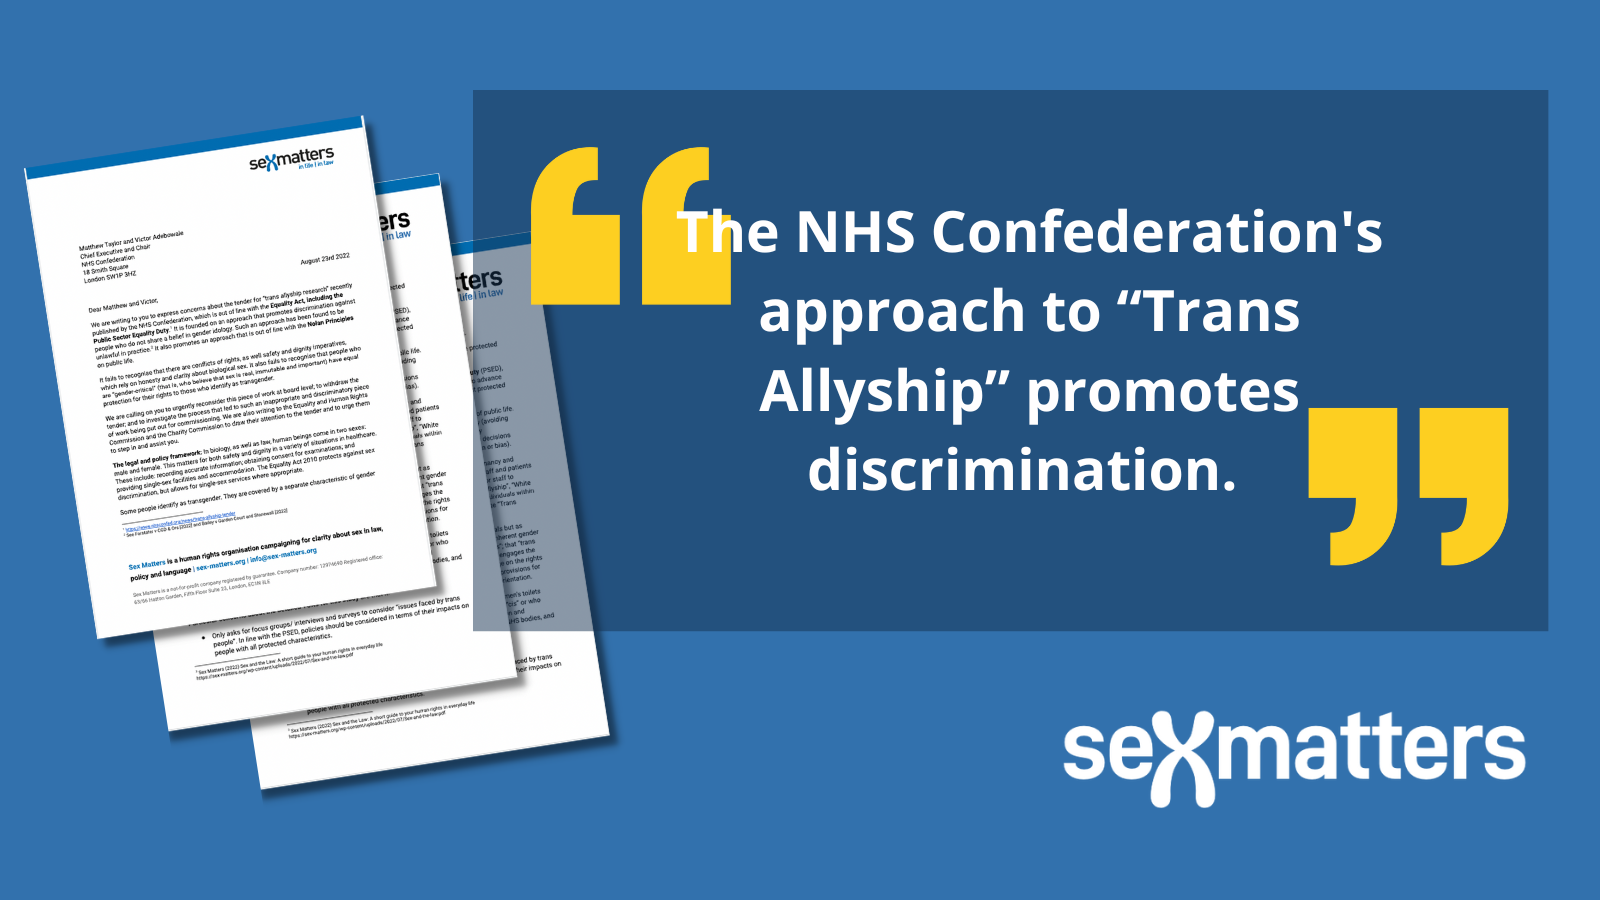 The NHS Confederation's approach to “Trans Allyship” promotes discrimination.